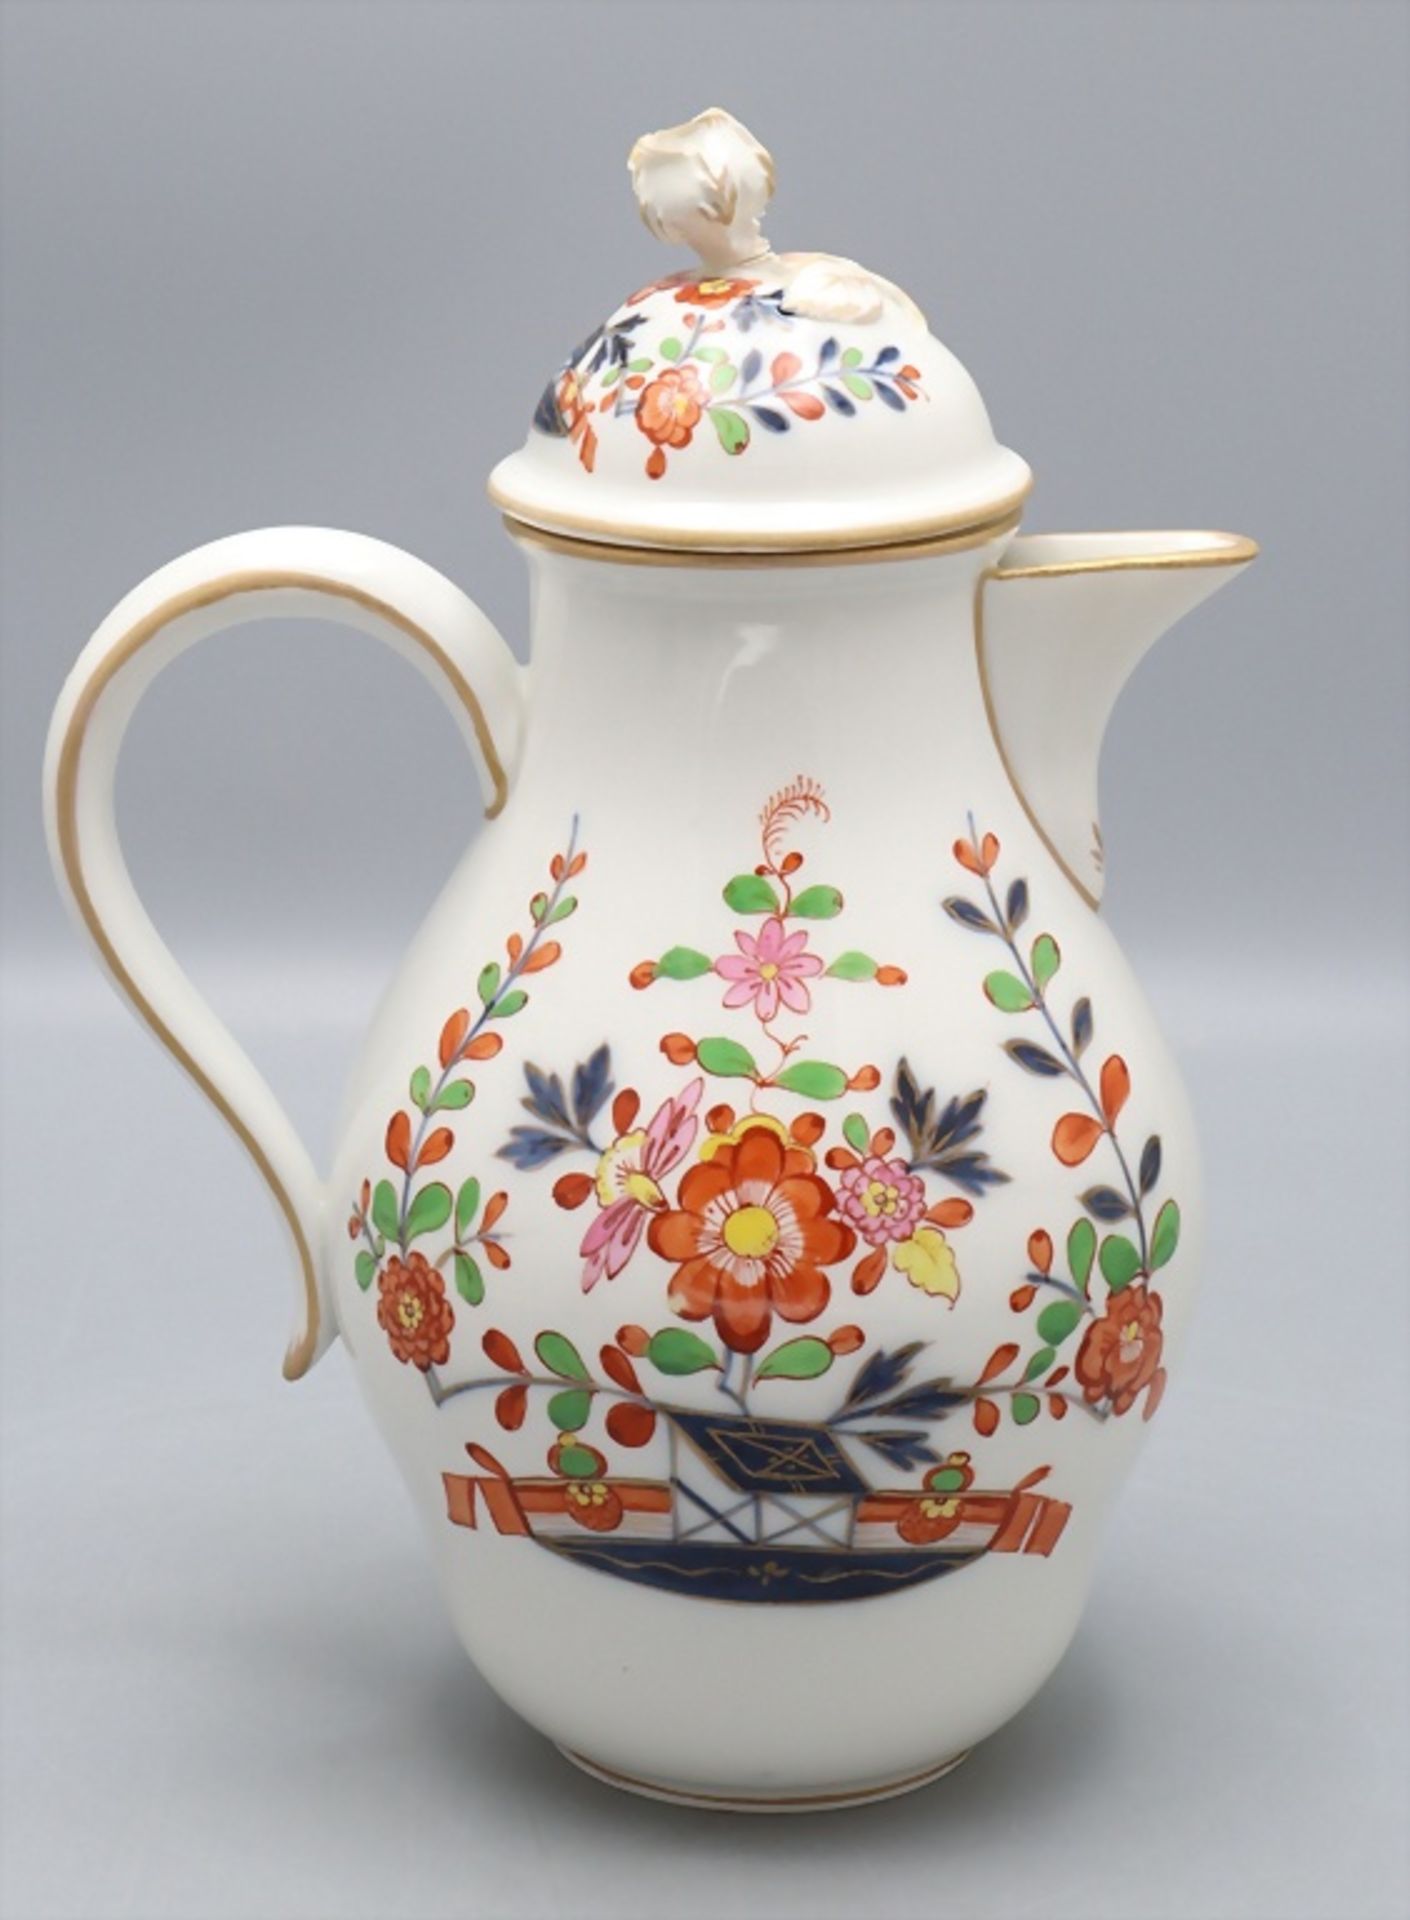 Kanne 'Indisch Purpur' / A pot with purple Indian pattern, Meissen, 1860-1924 - Image 3 of 7